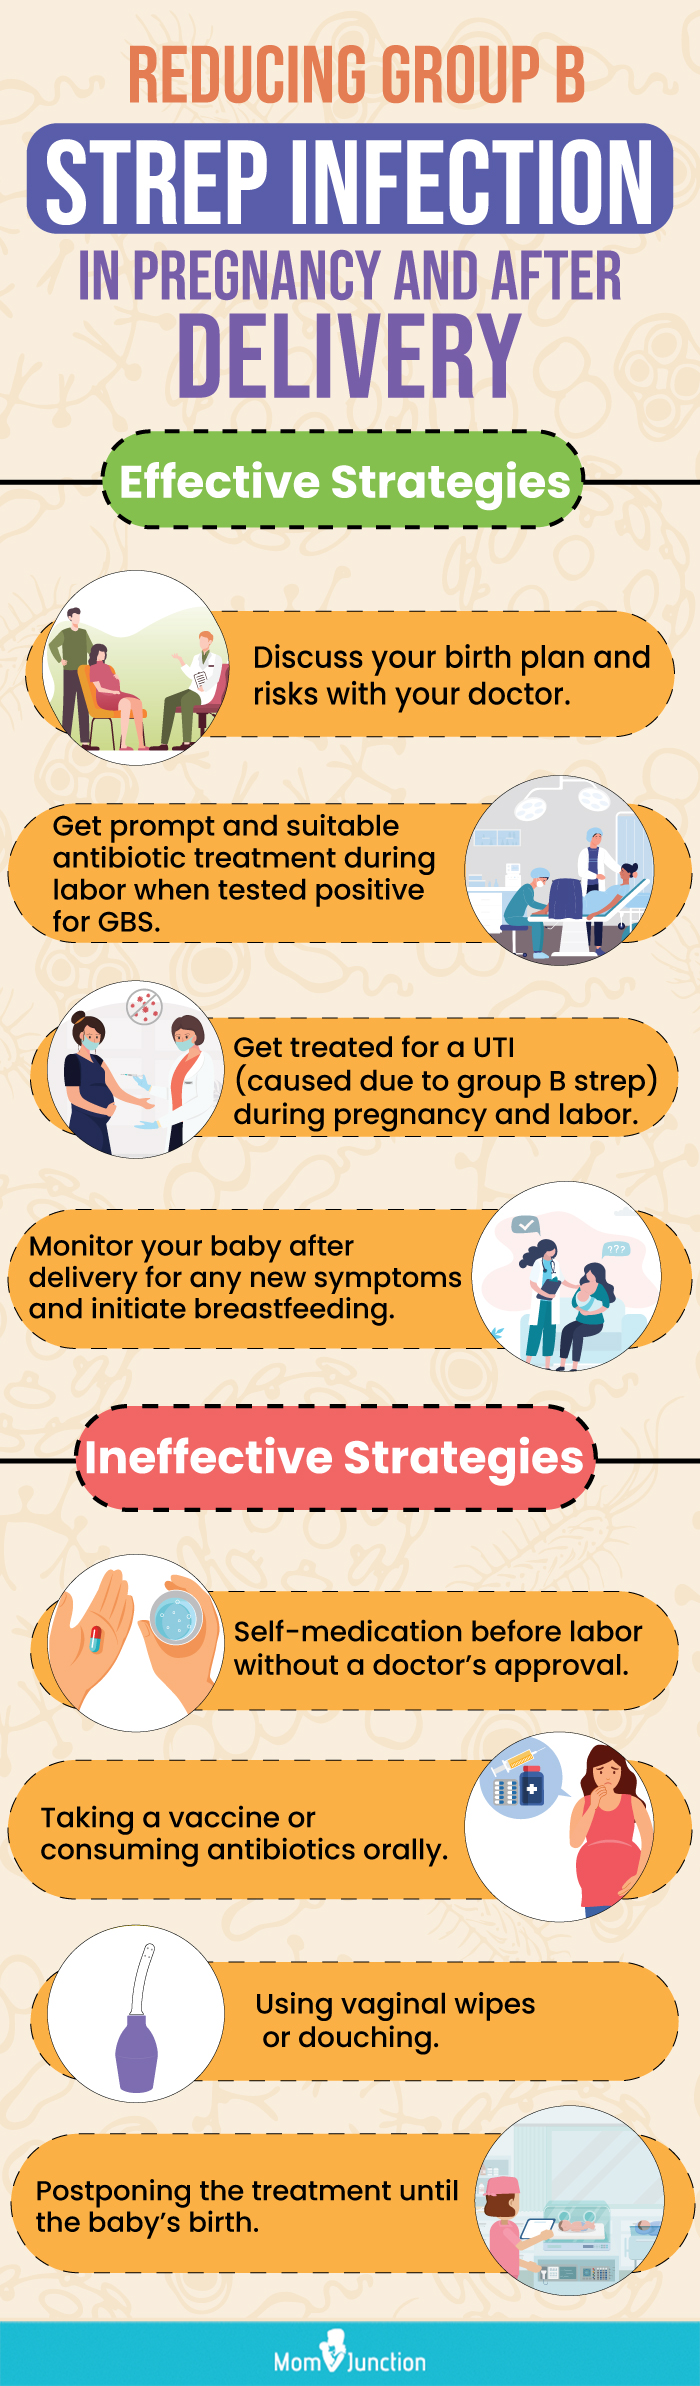 reducing group b strep infection in pregnancy and after delivery (infographic)